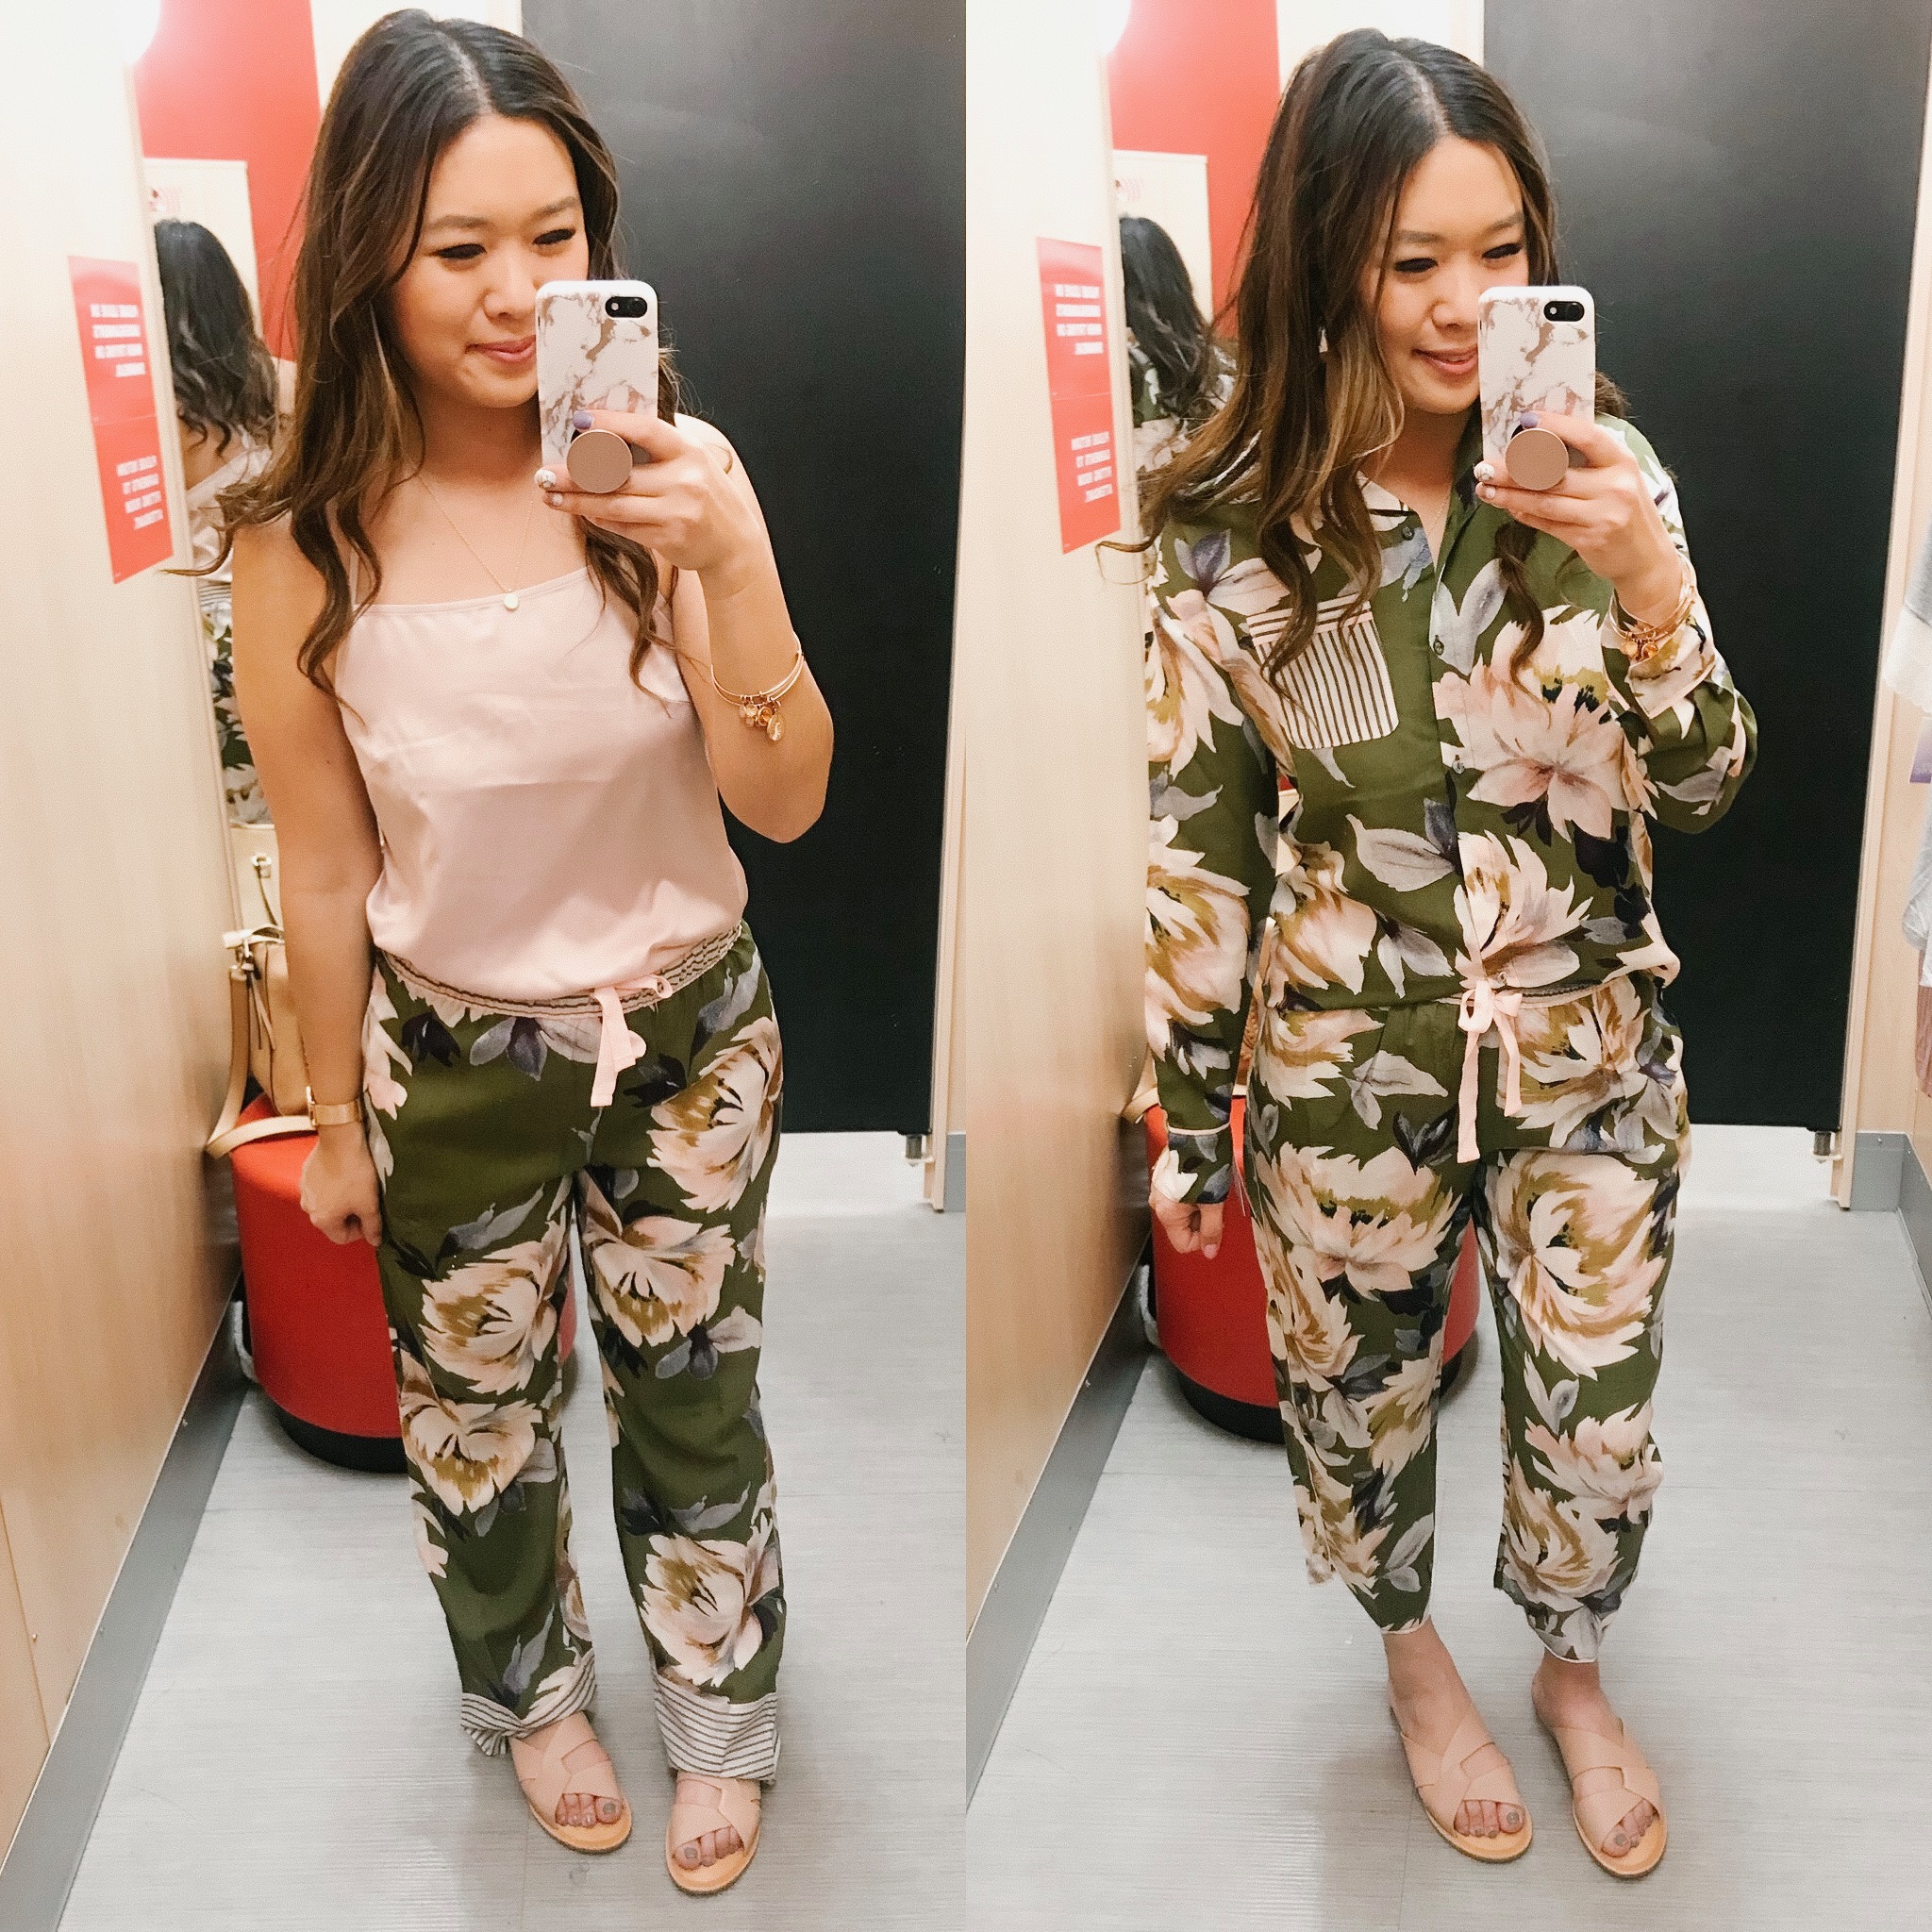 Review Of Target's New Loungewear and Sleepwear Brand - Stars Above